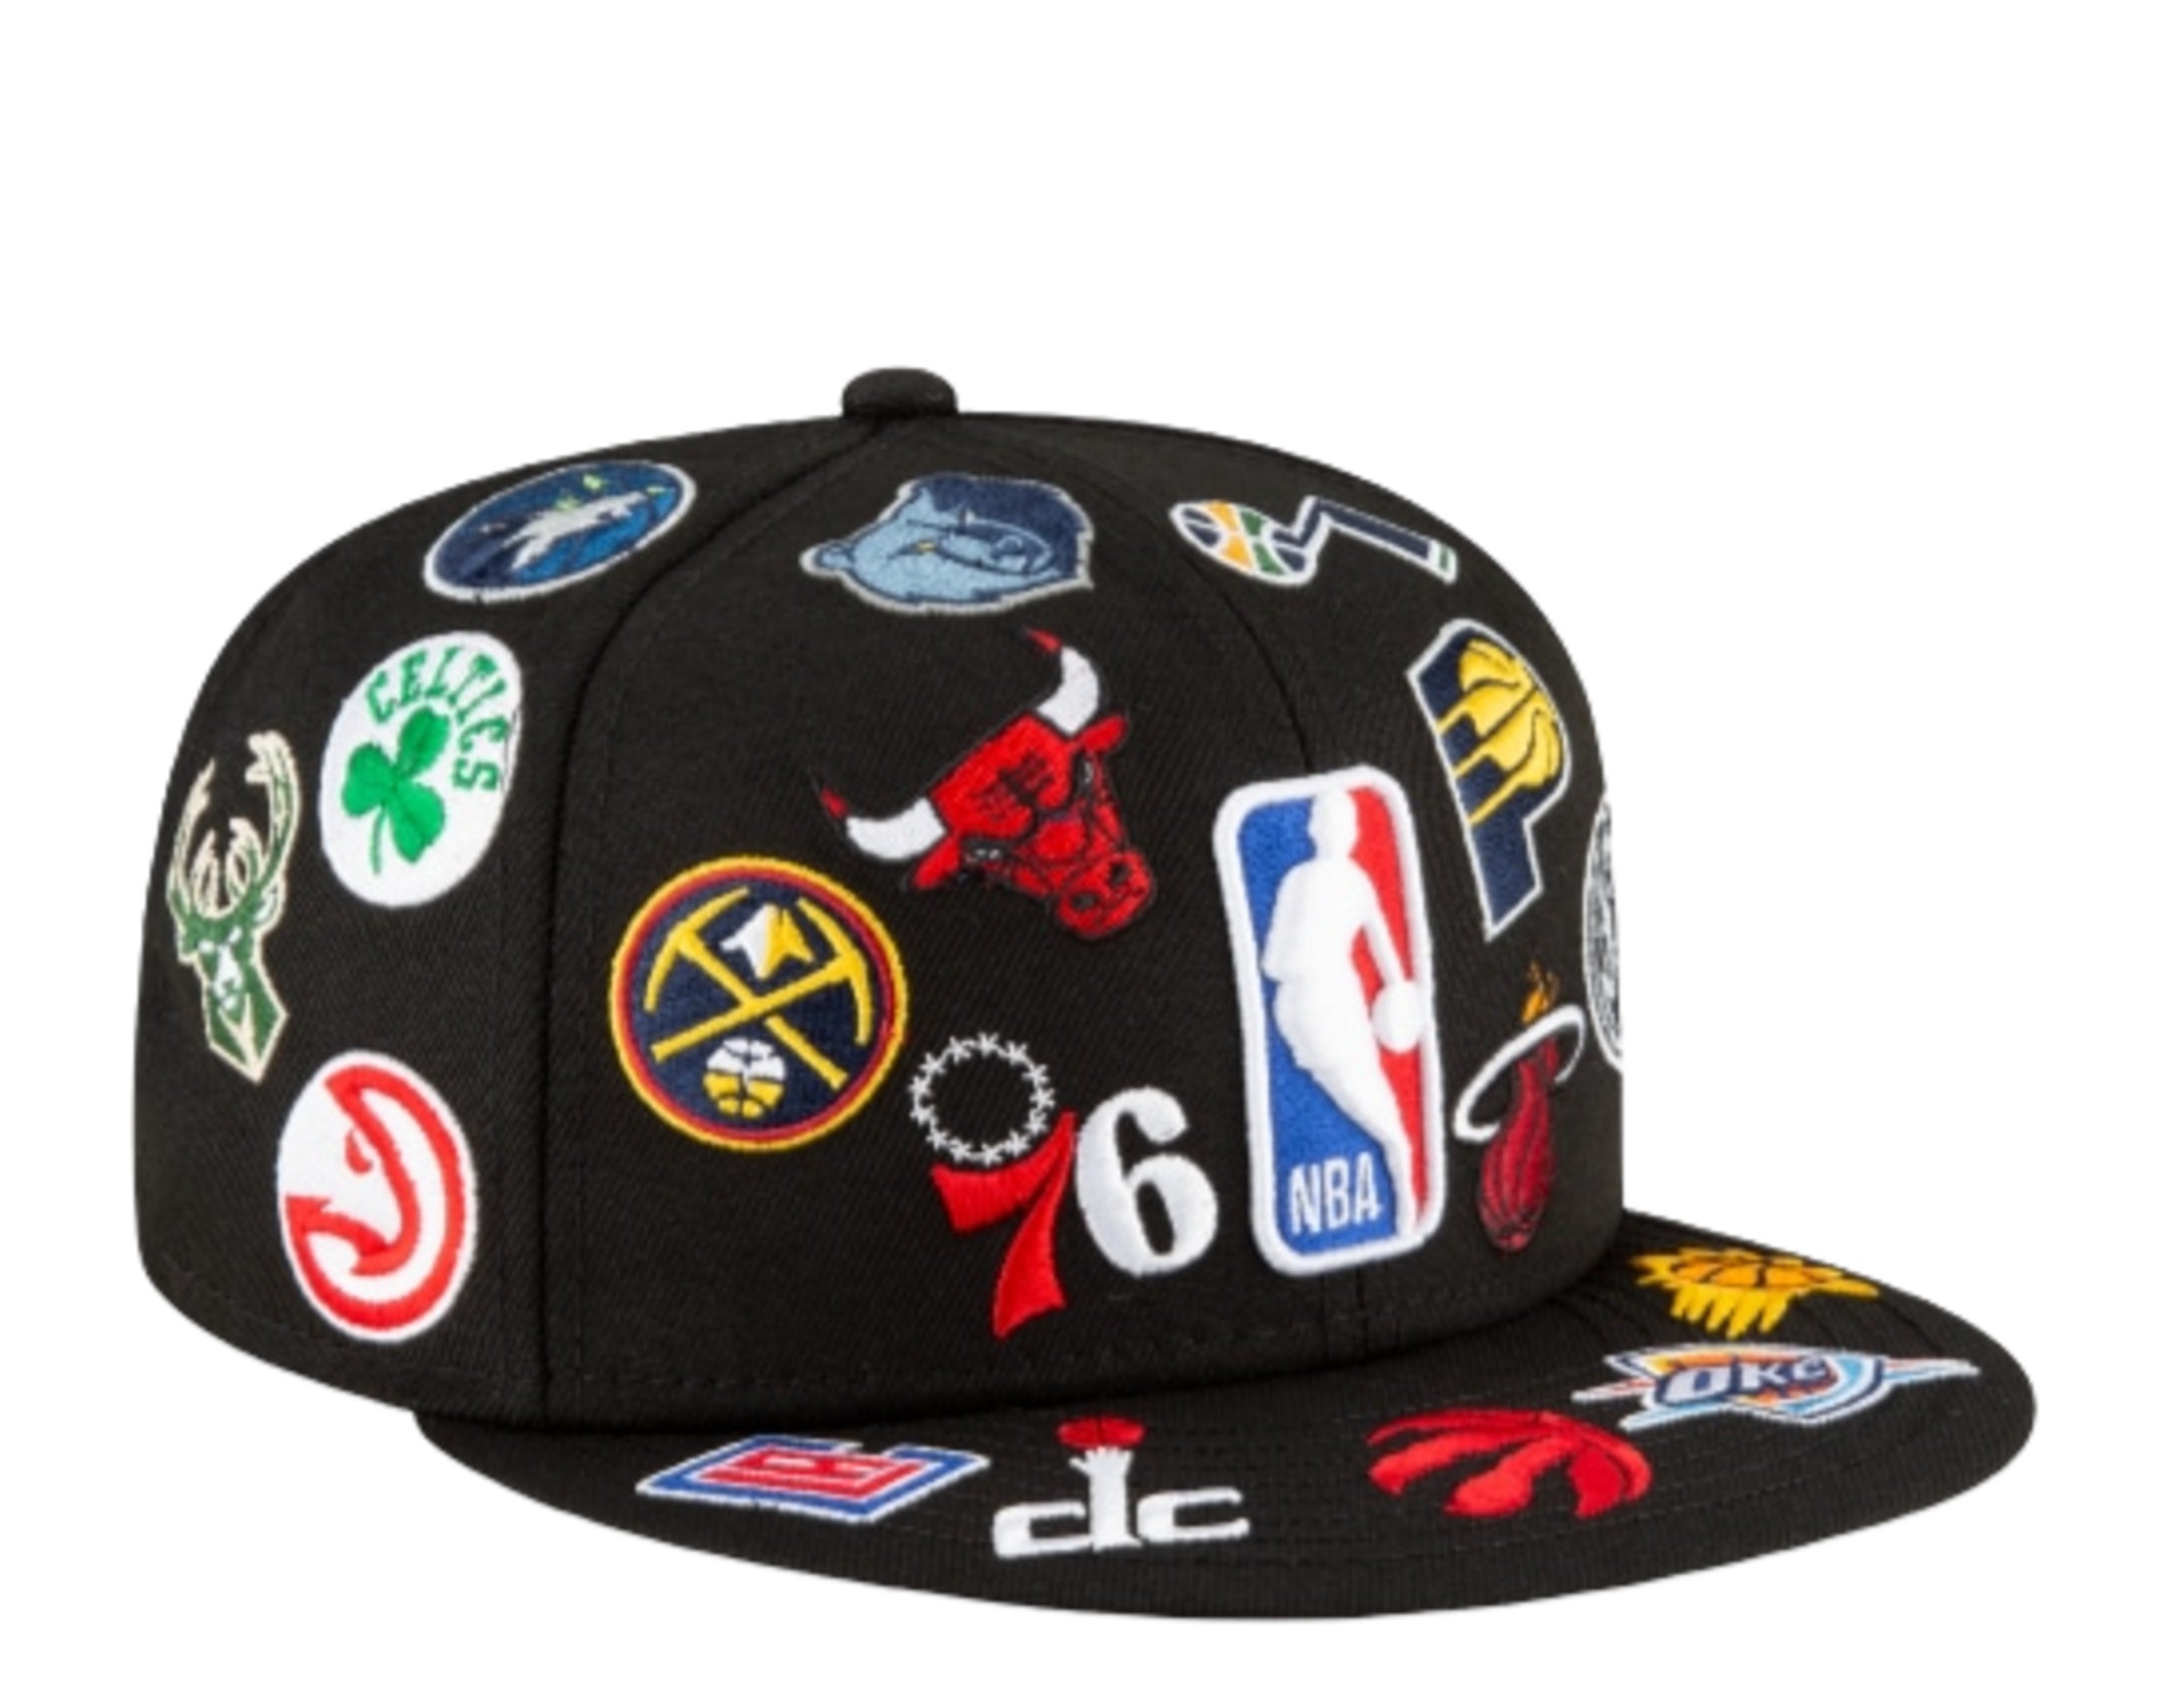 Official NBA, NFL & Esports Fitted Hats